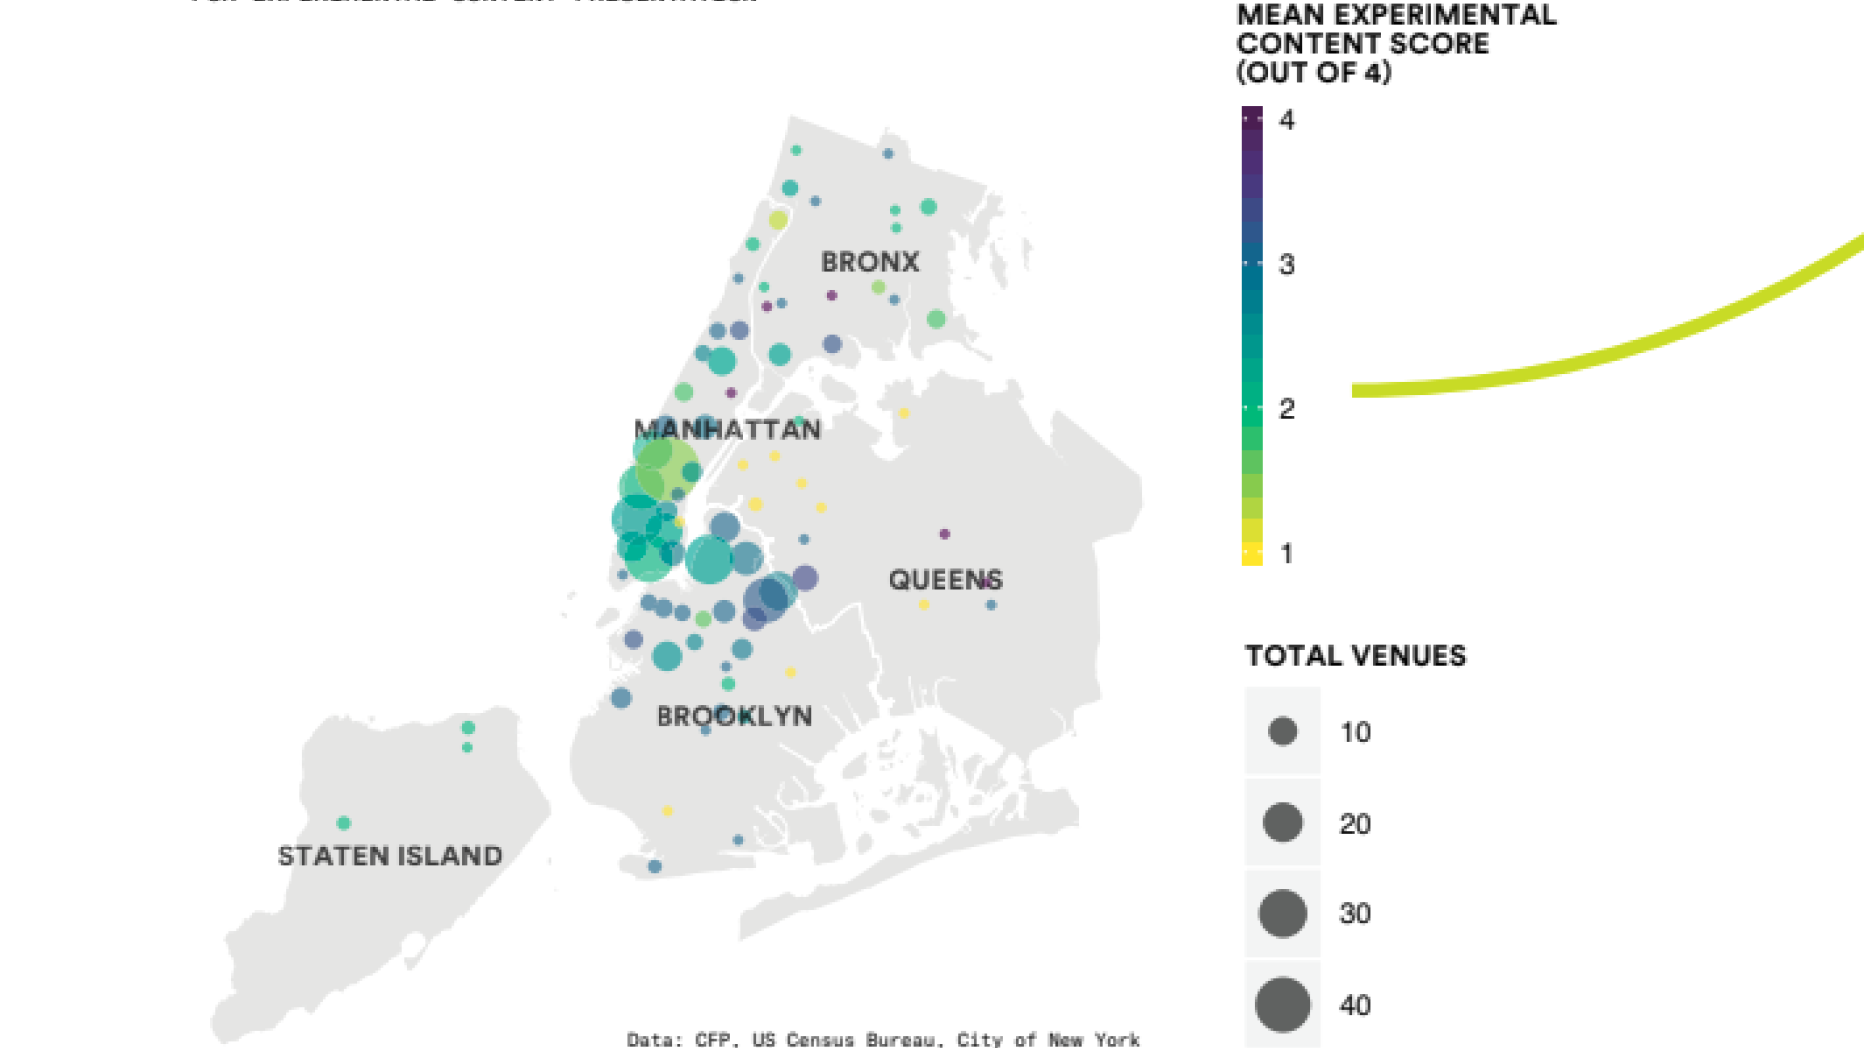  Map showing where the most experimental content being presented in NY area. Manhattan is the main center along with Brooklyn